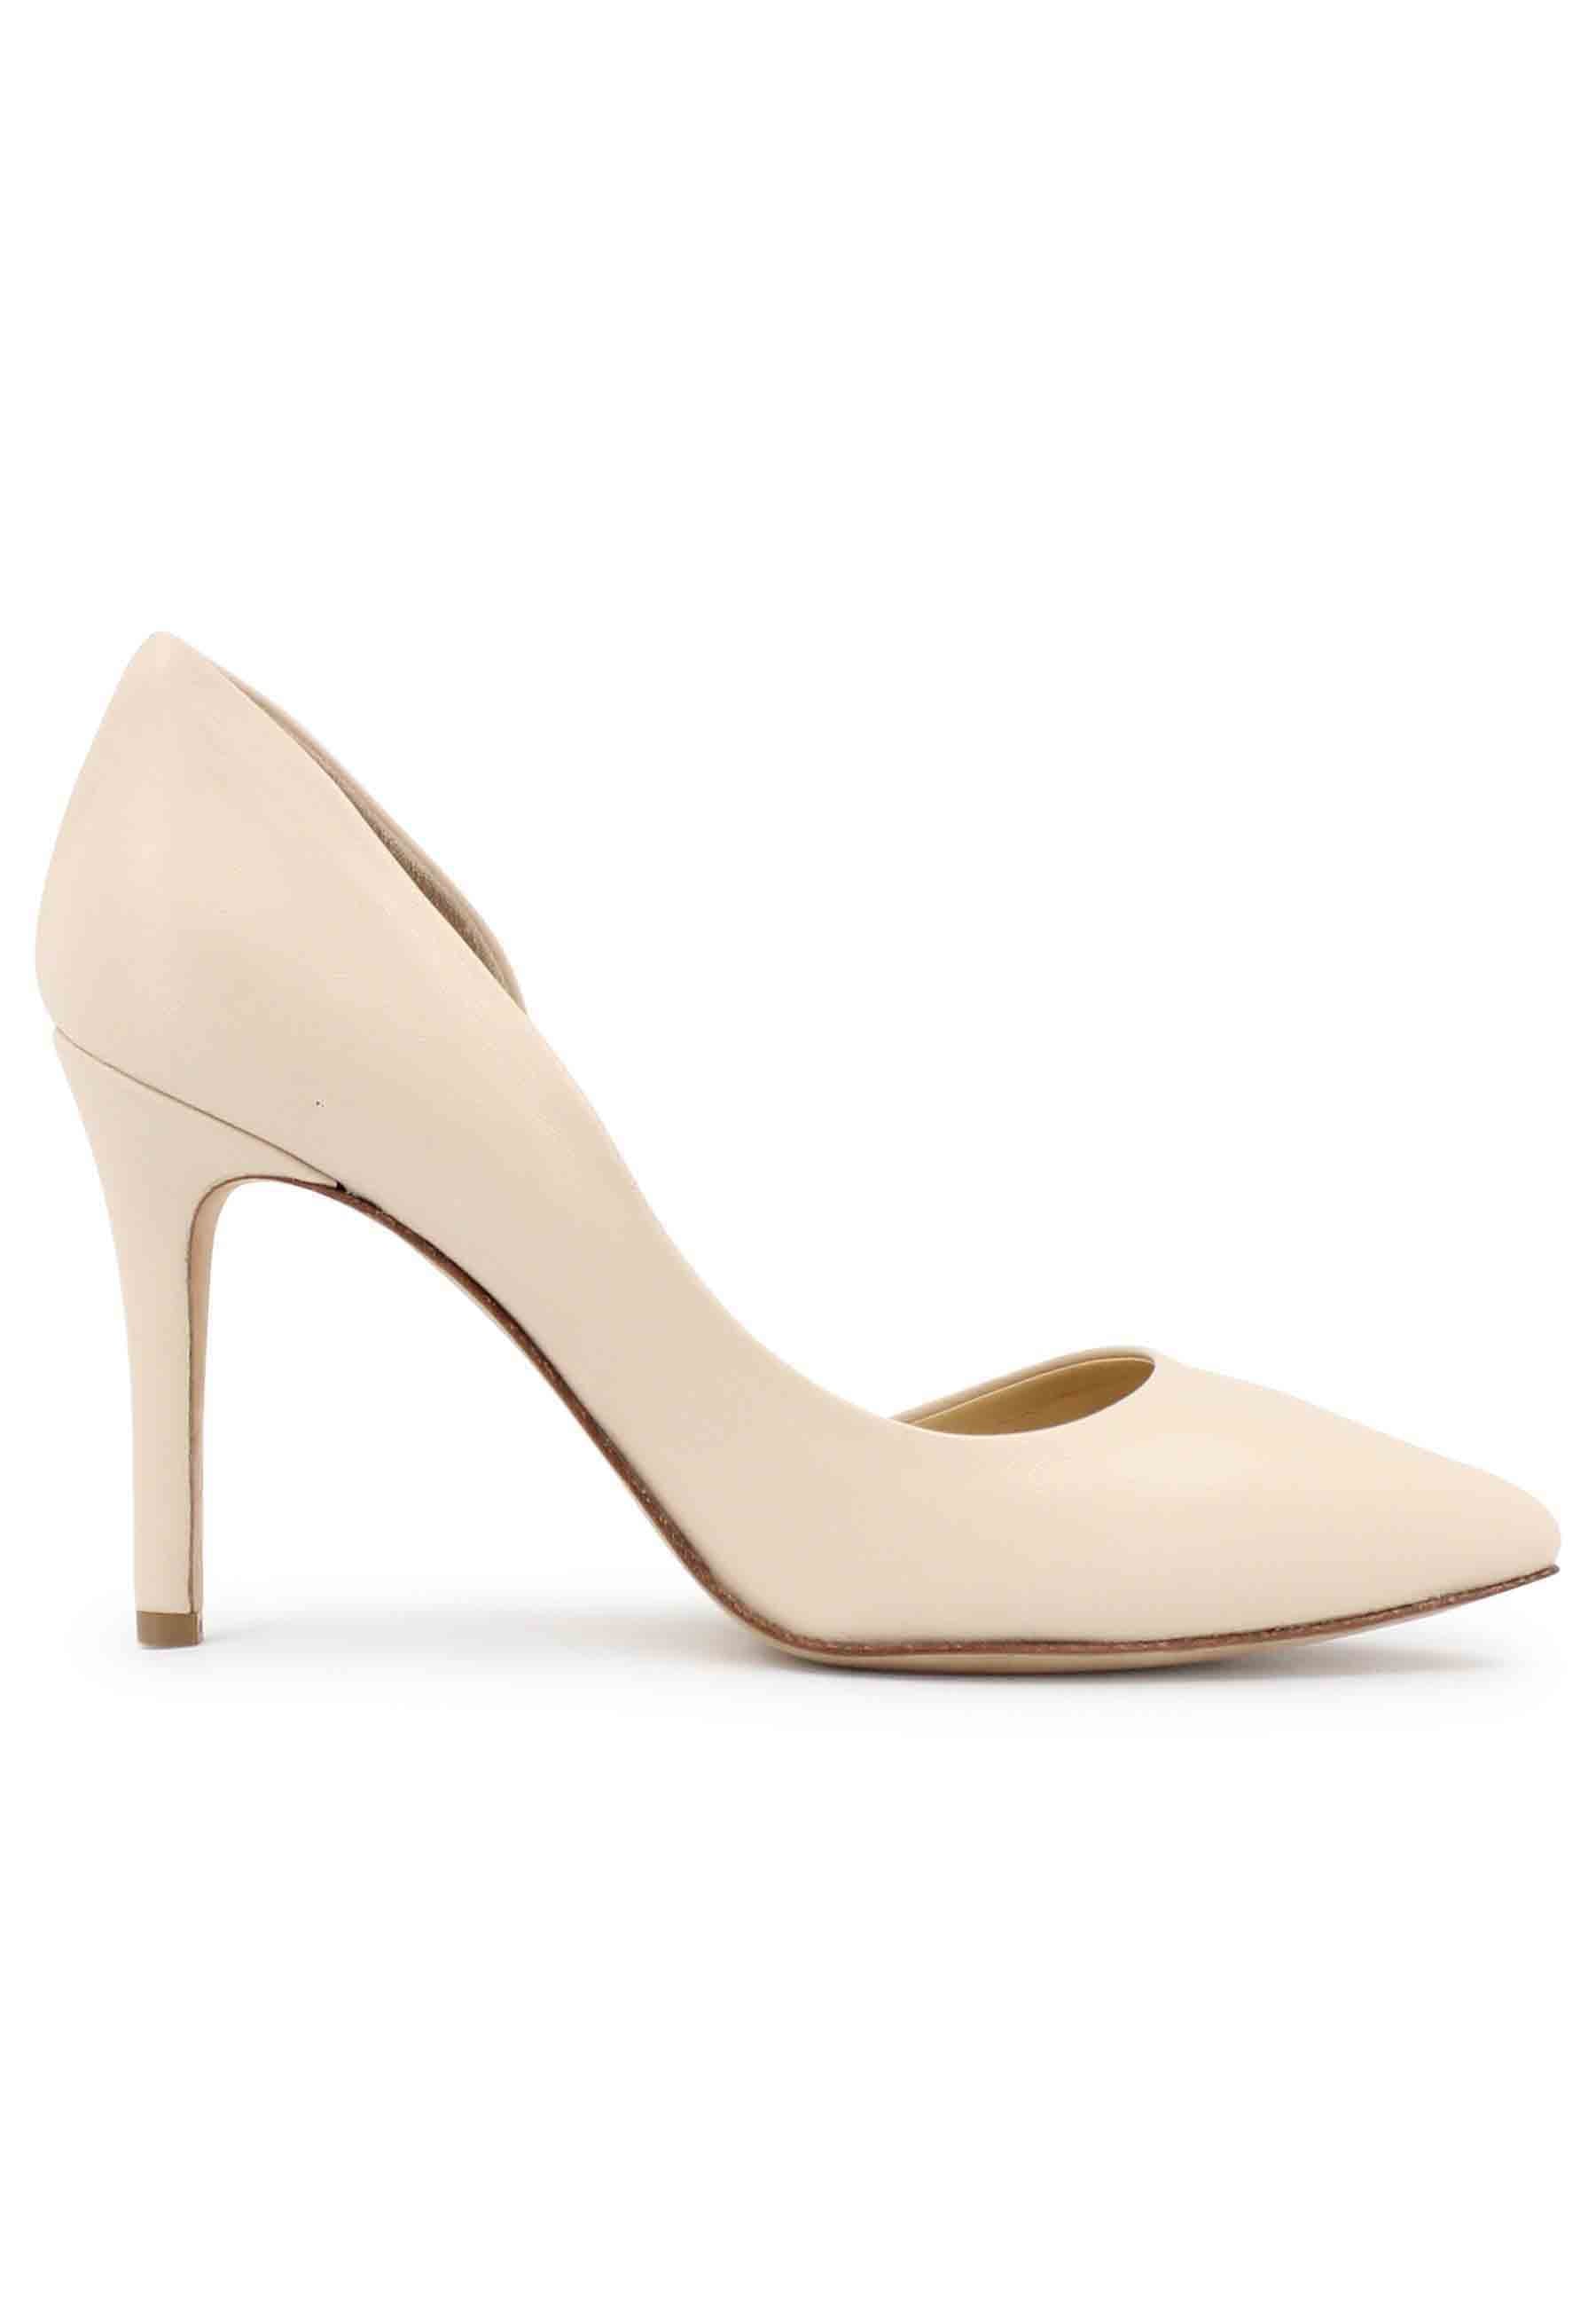 Women's cream leather pumps with high heels